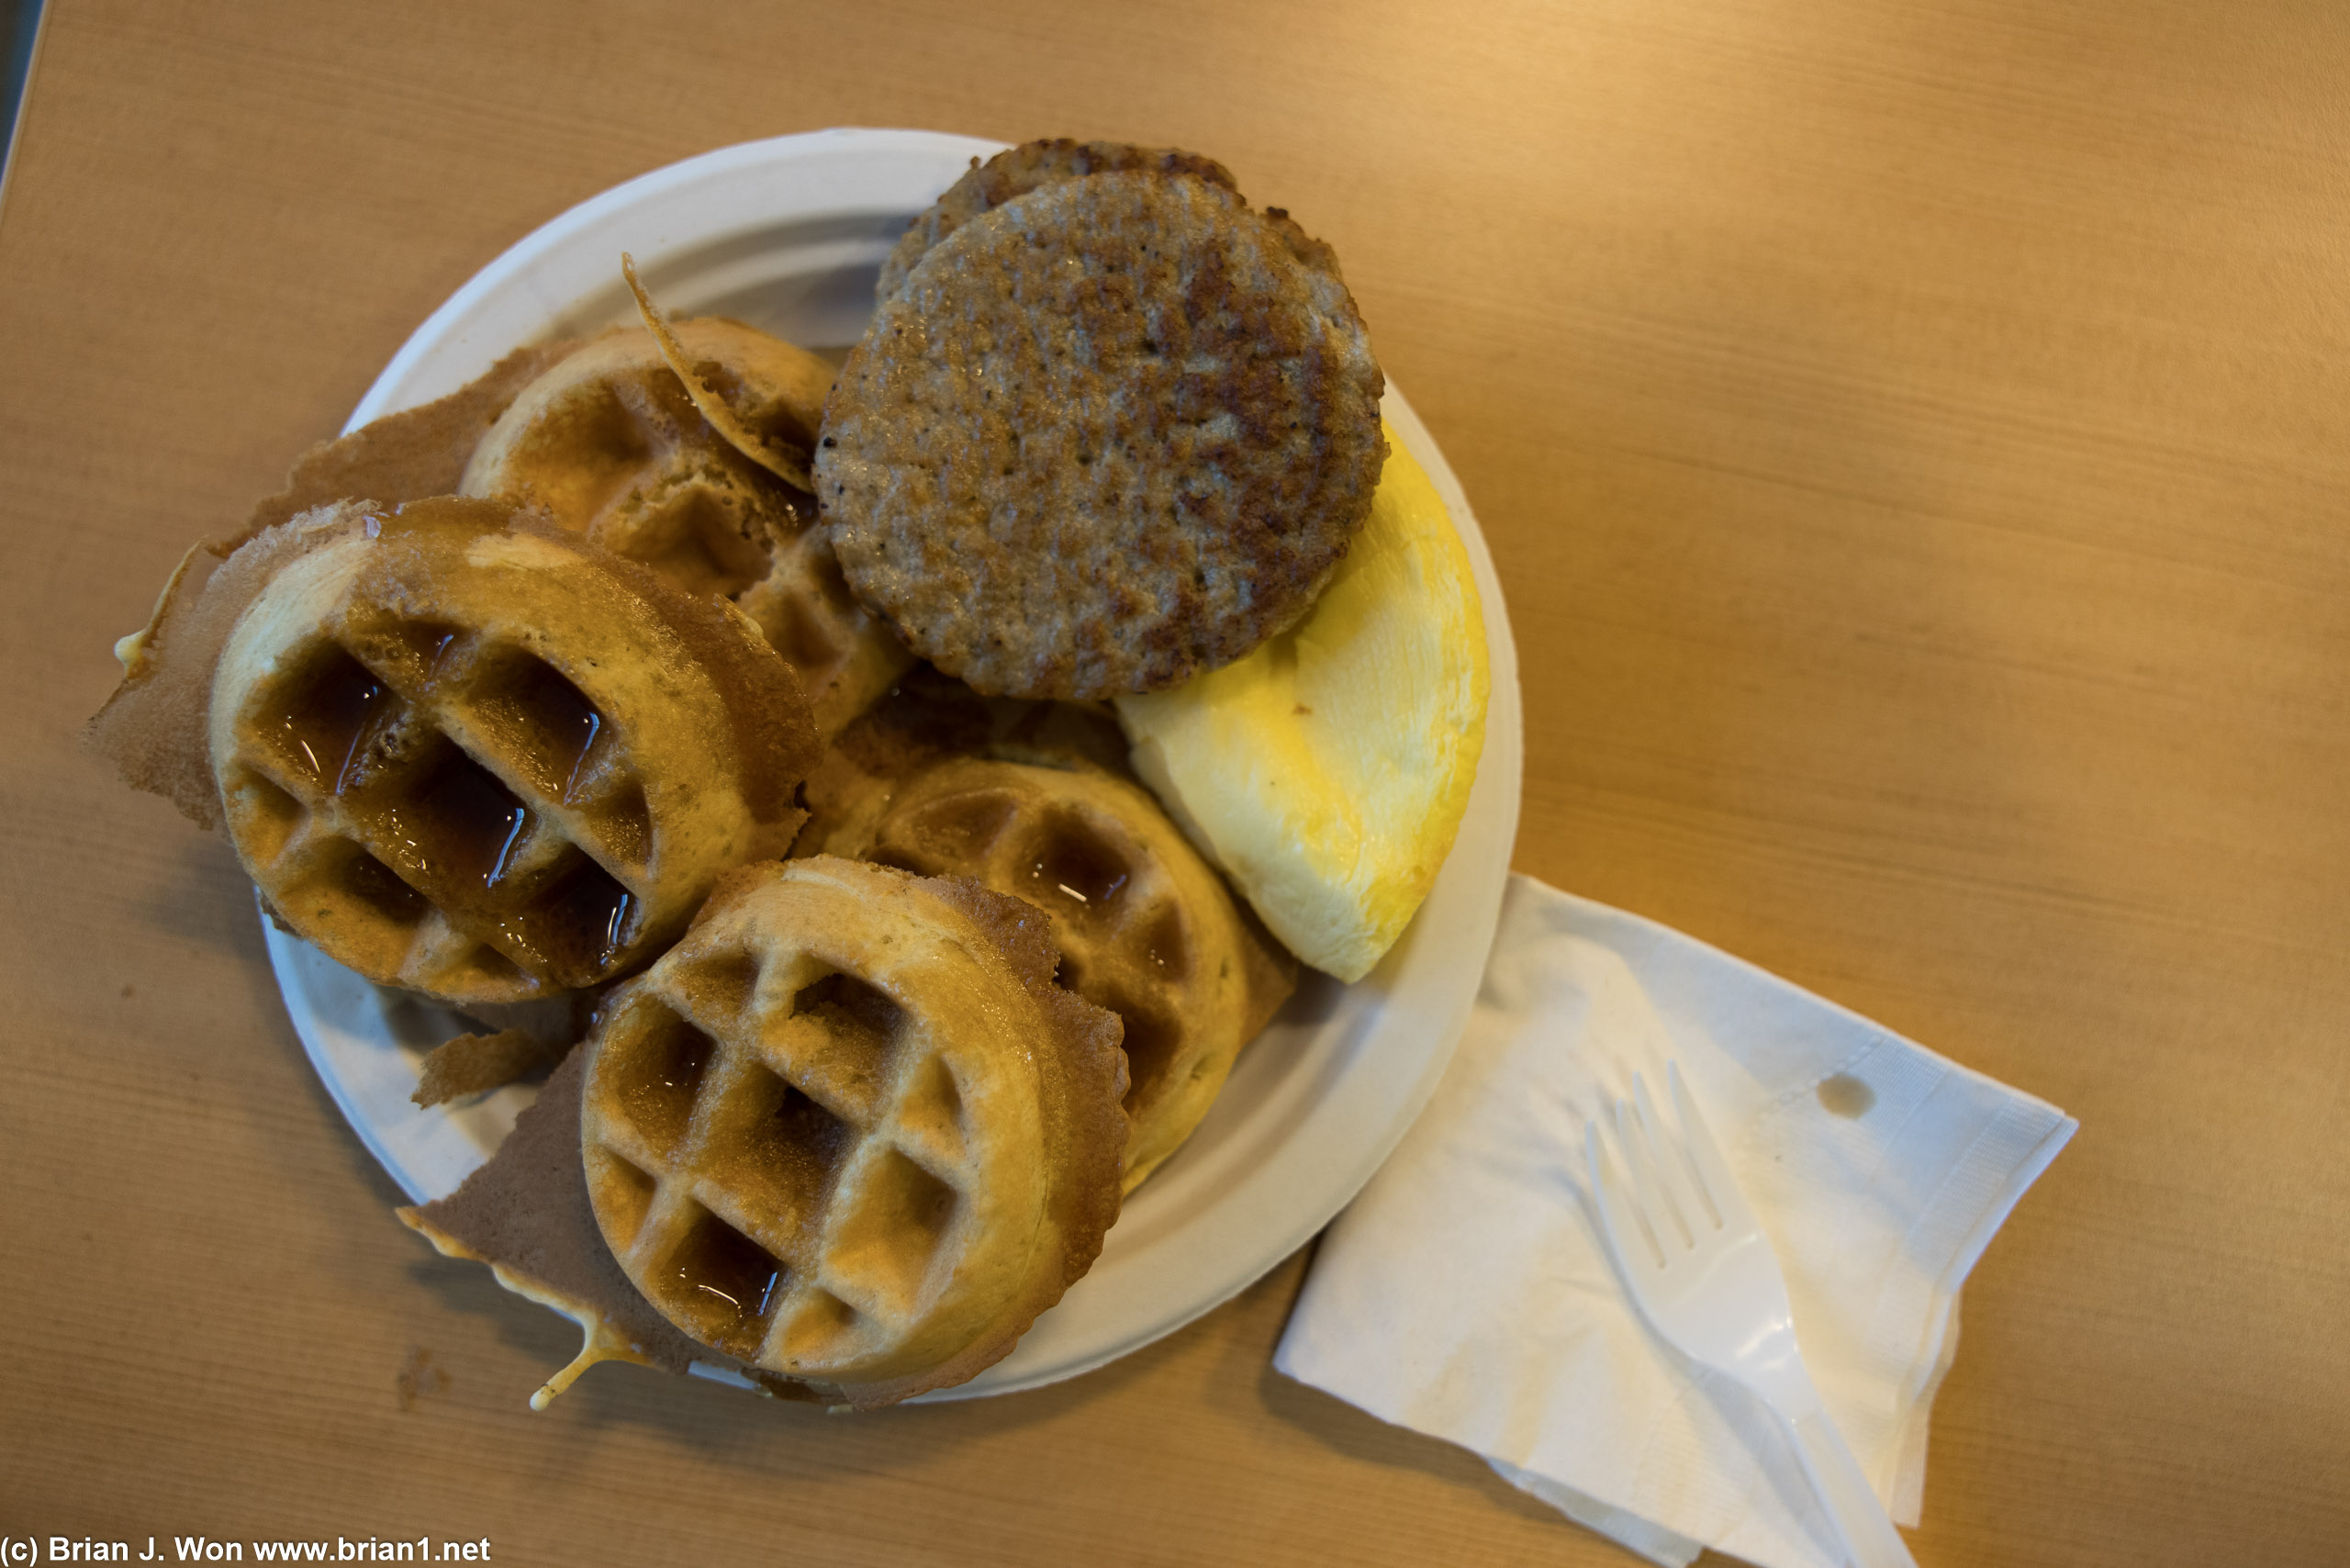 Sausage and waffle were at least edible. Egg was ehhh not good.